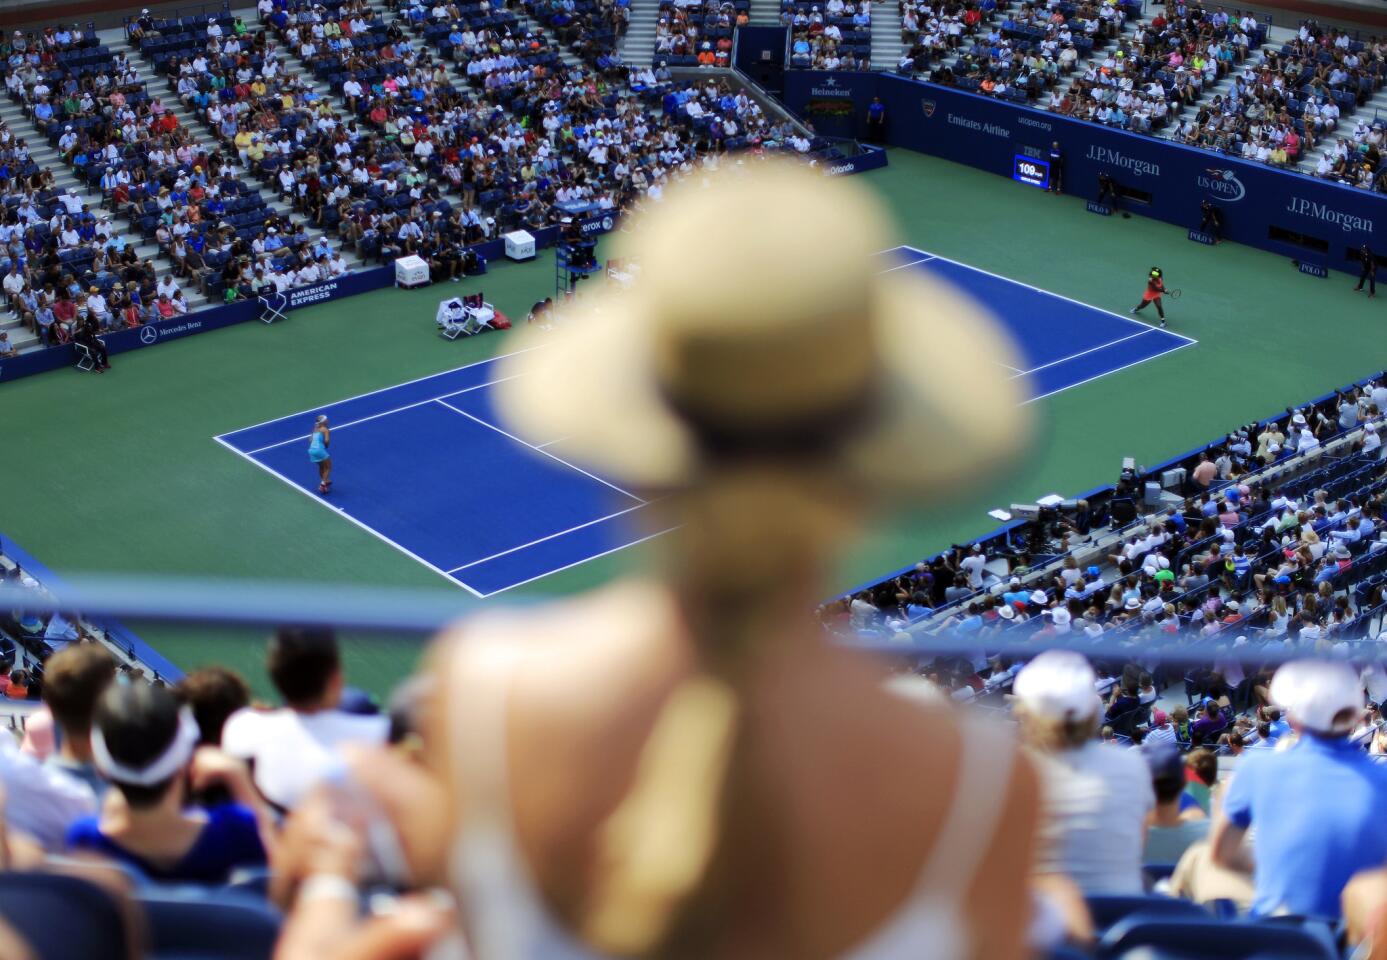 Spectators watch play between Serena Williams, right, and Kiki Bertens, of the Netherlands, during the second round of the U.S. Open tennis tournament, Wednesday, Sept. 2, 2015, in New York. (AP Photo/Matt Rourke)